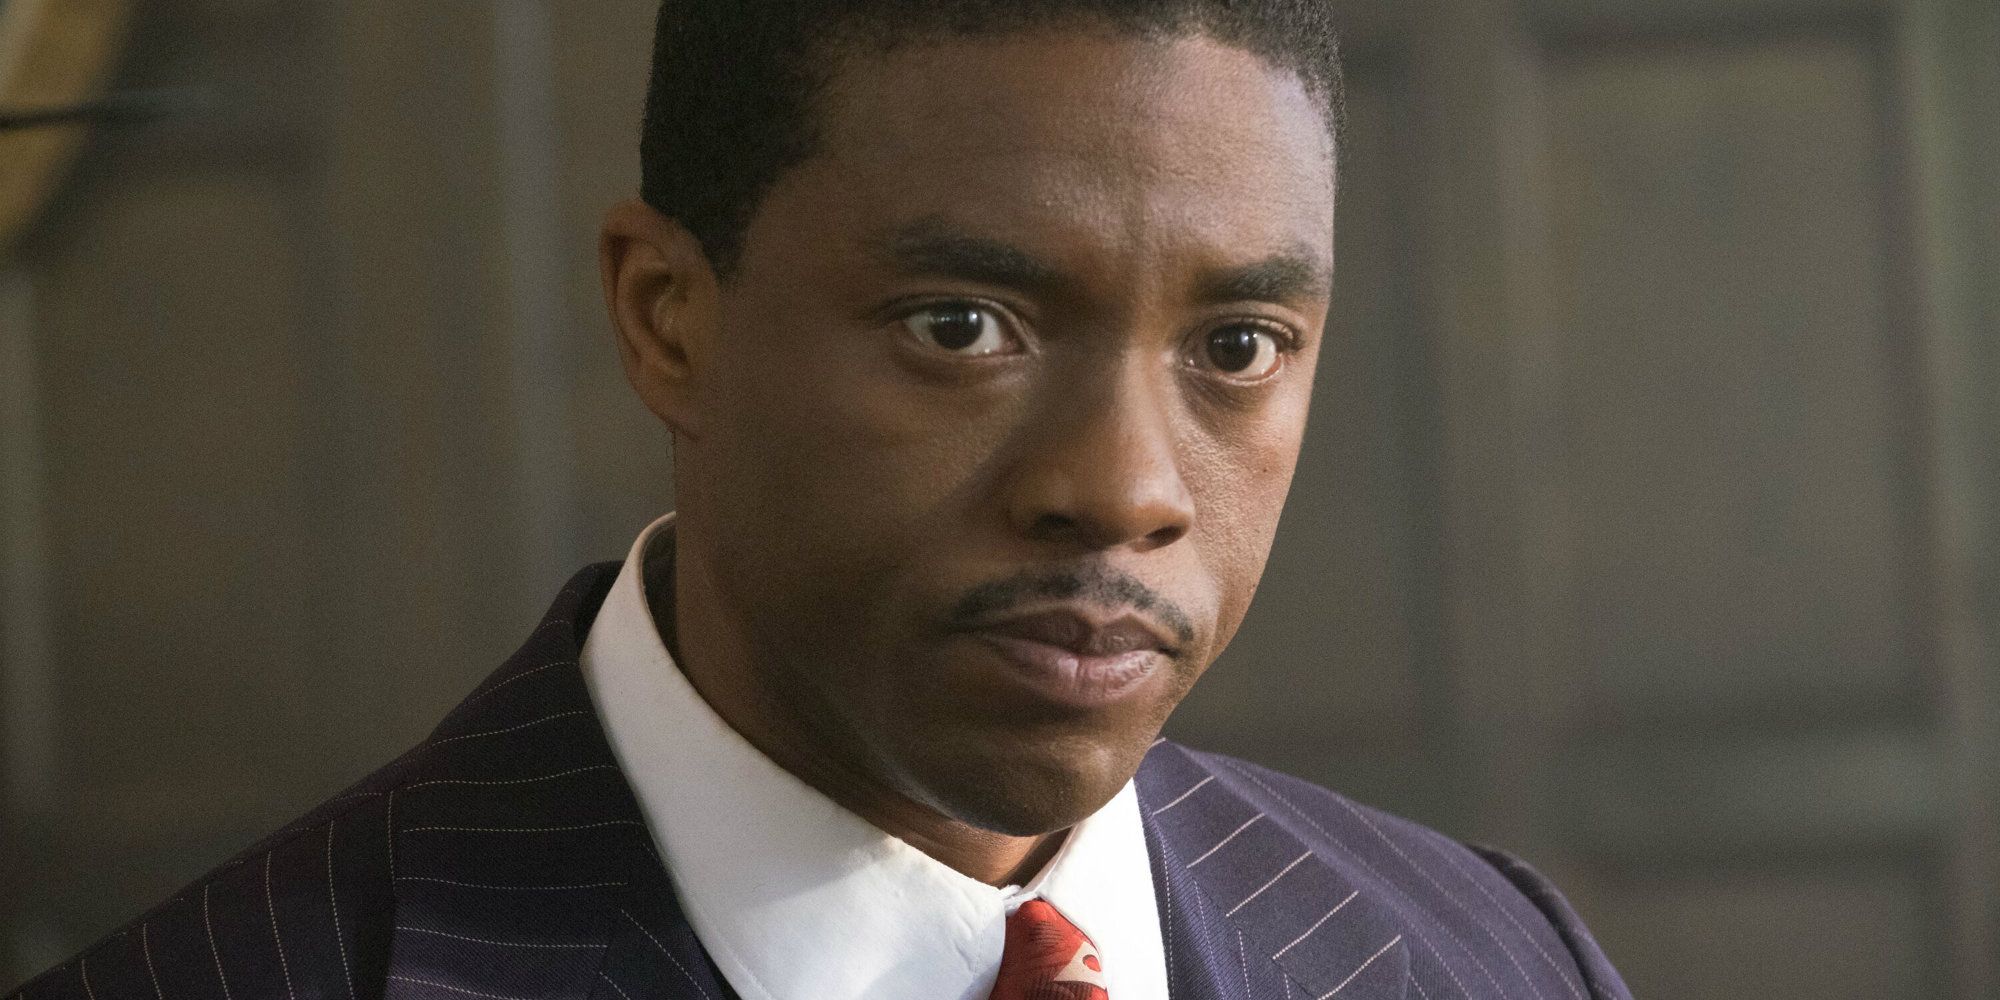 Marshall Trailer #2: Chadwick Boseman Fights For Justice